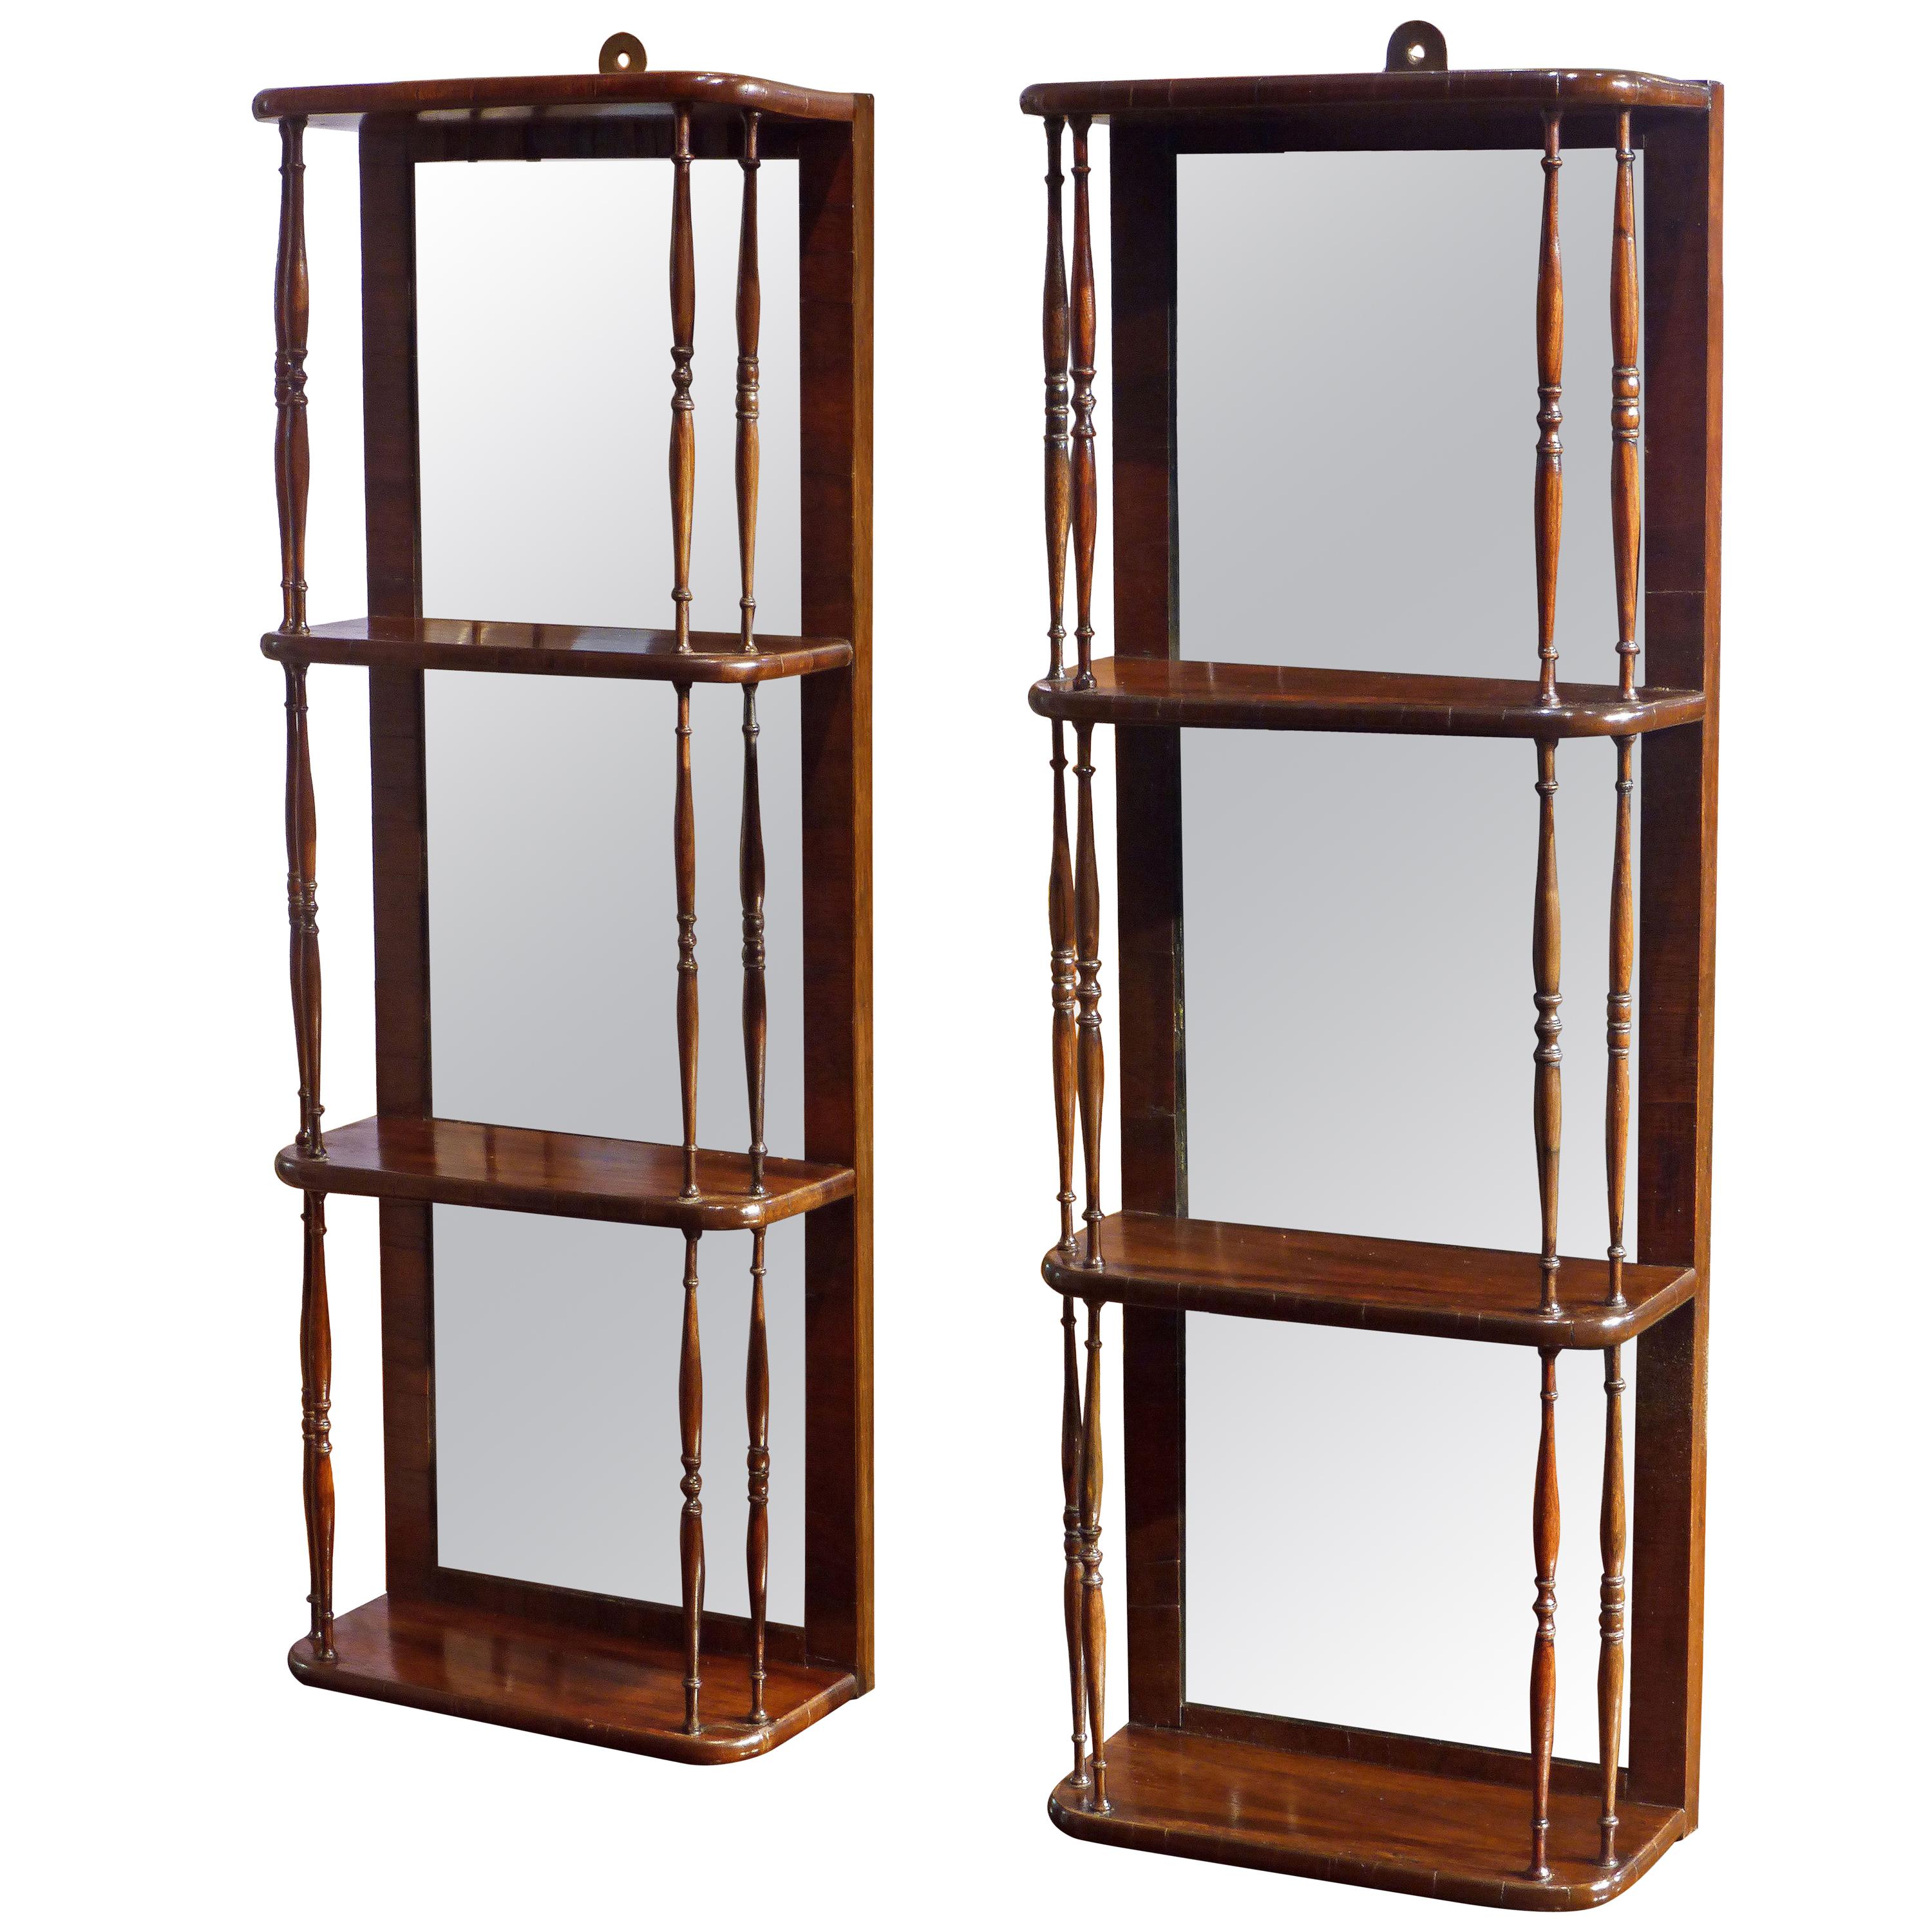 19th Century Regency Small Rosewood Hanging Wall Shelves